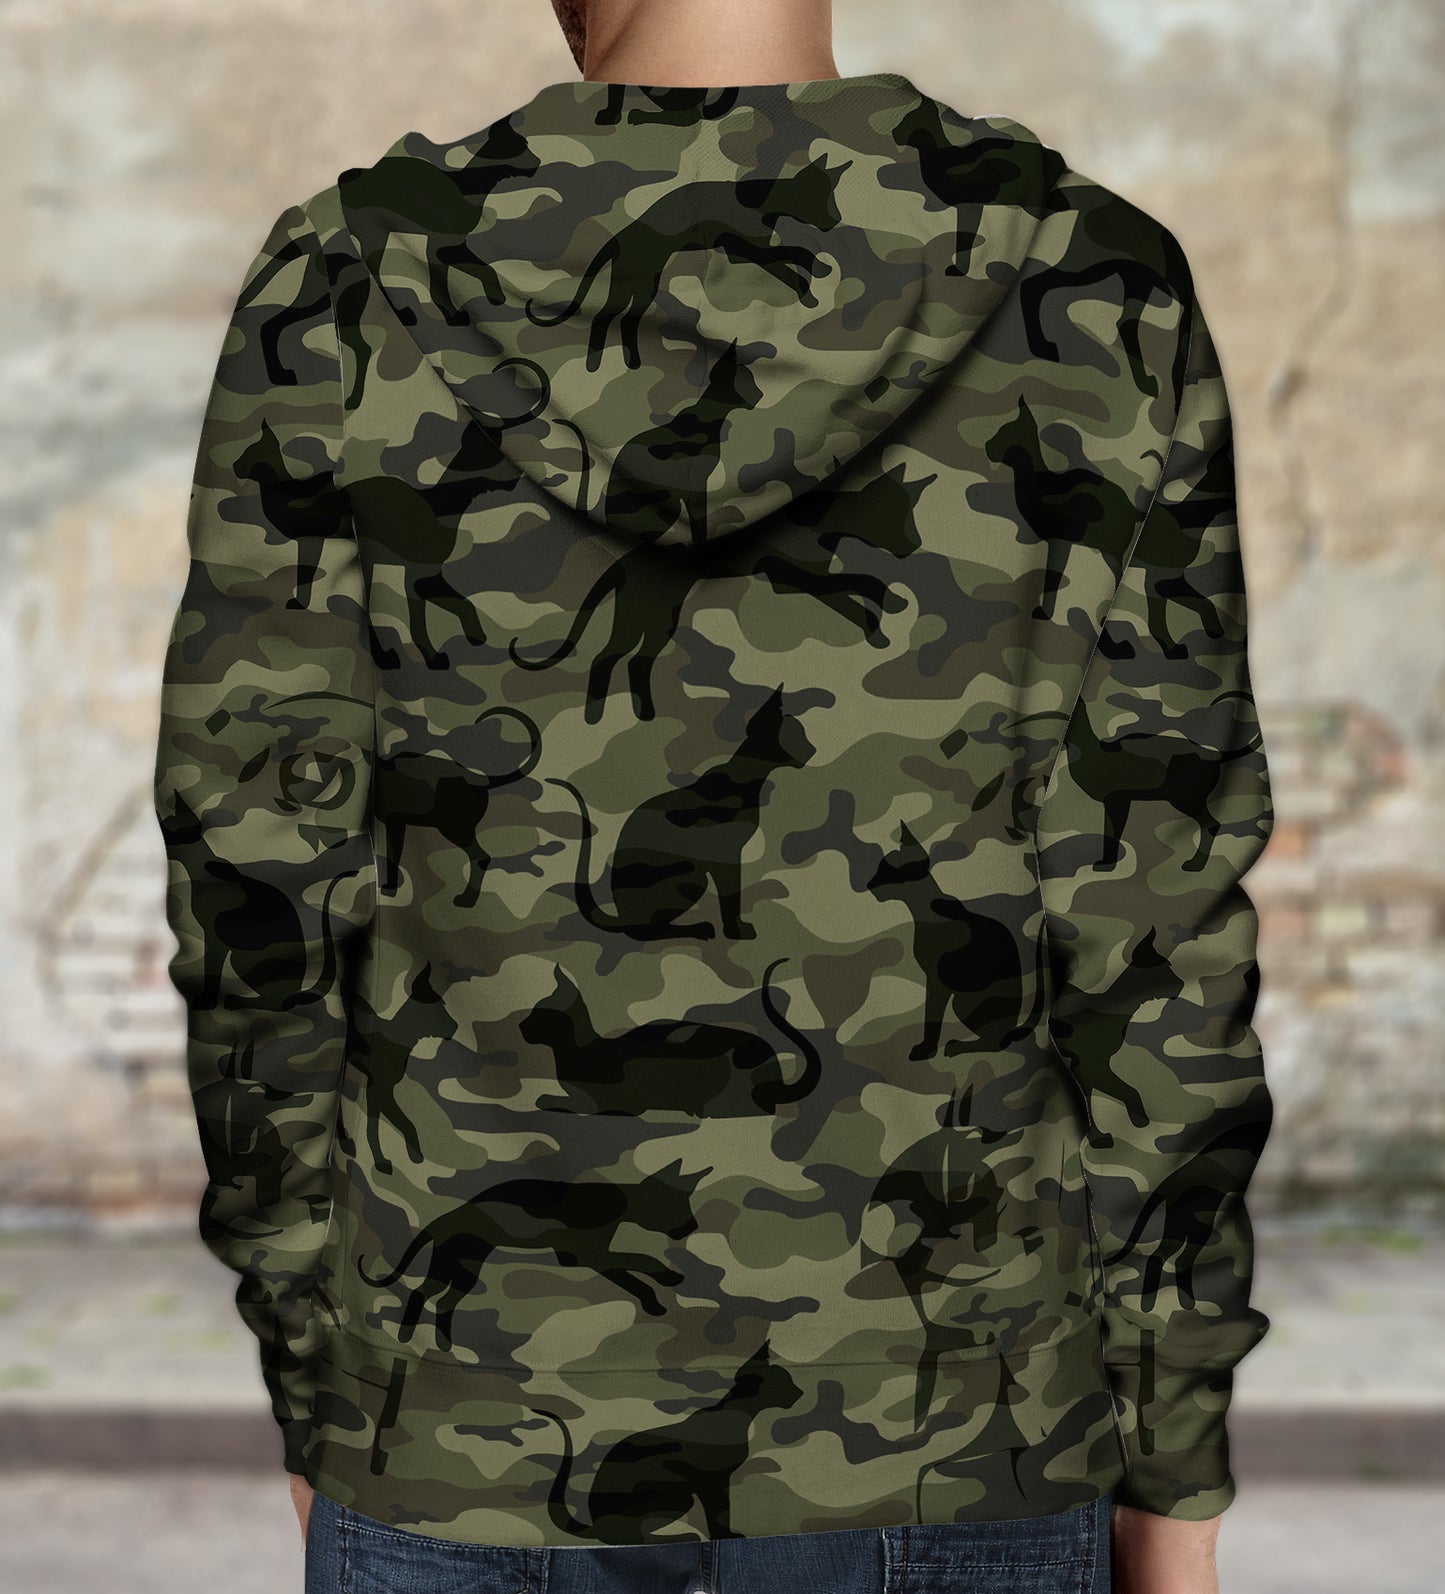 Street Style With Sphynx Cat Camo Hoodie V1